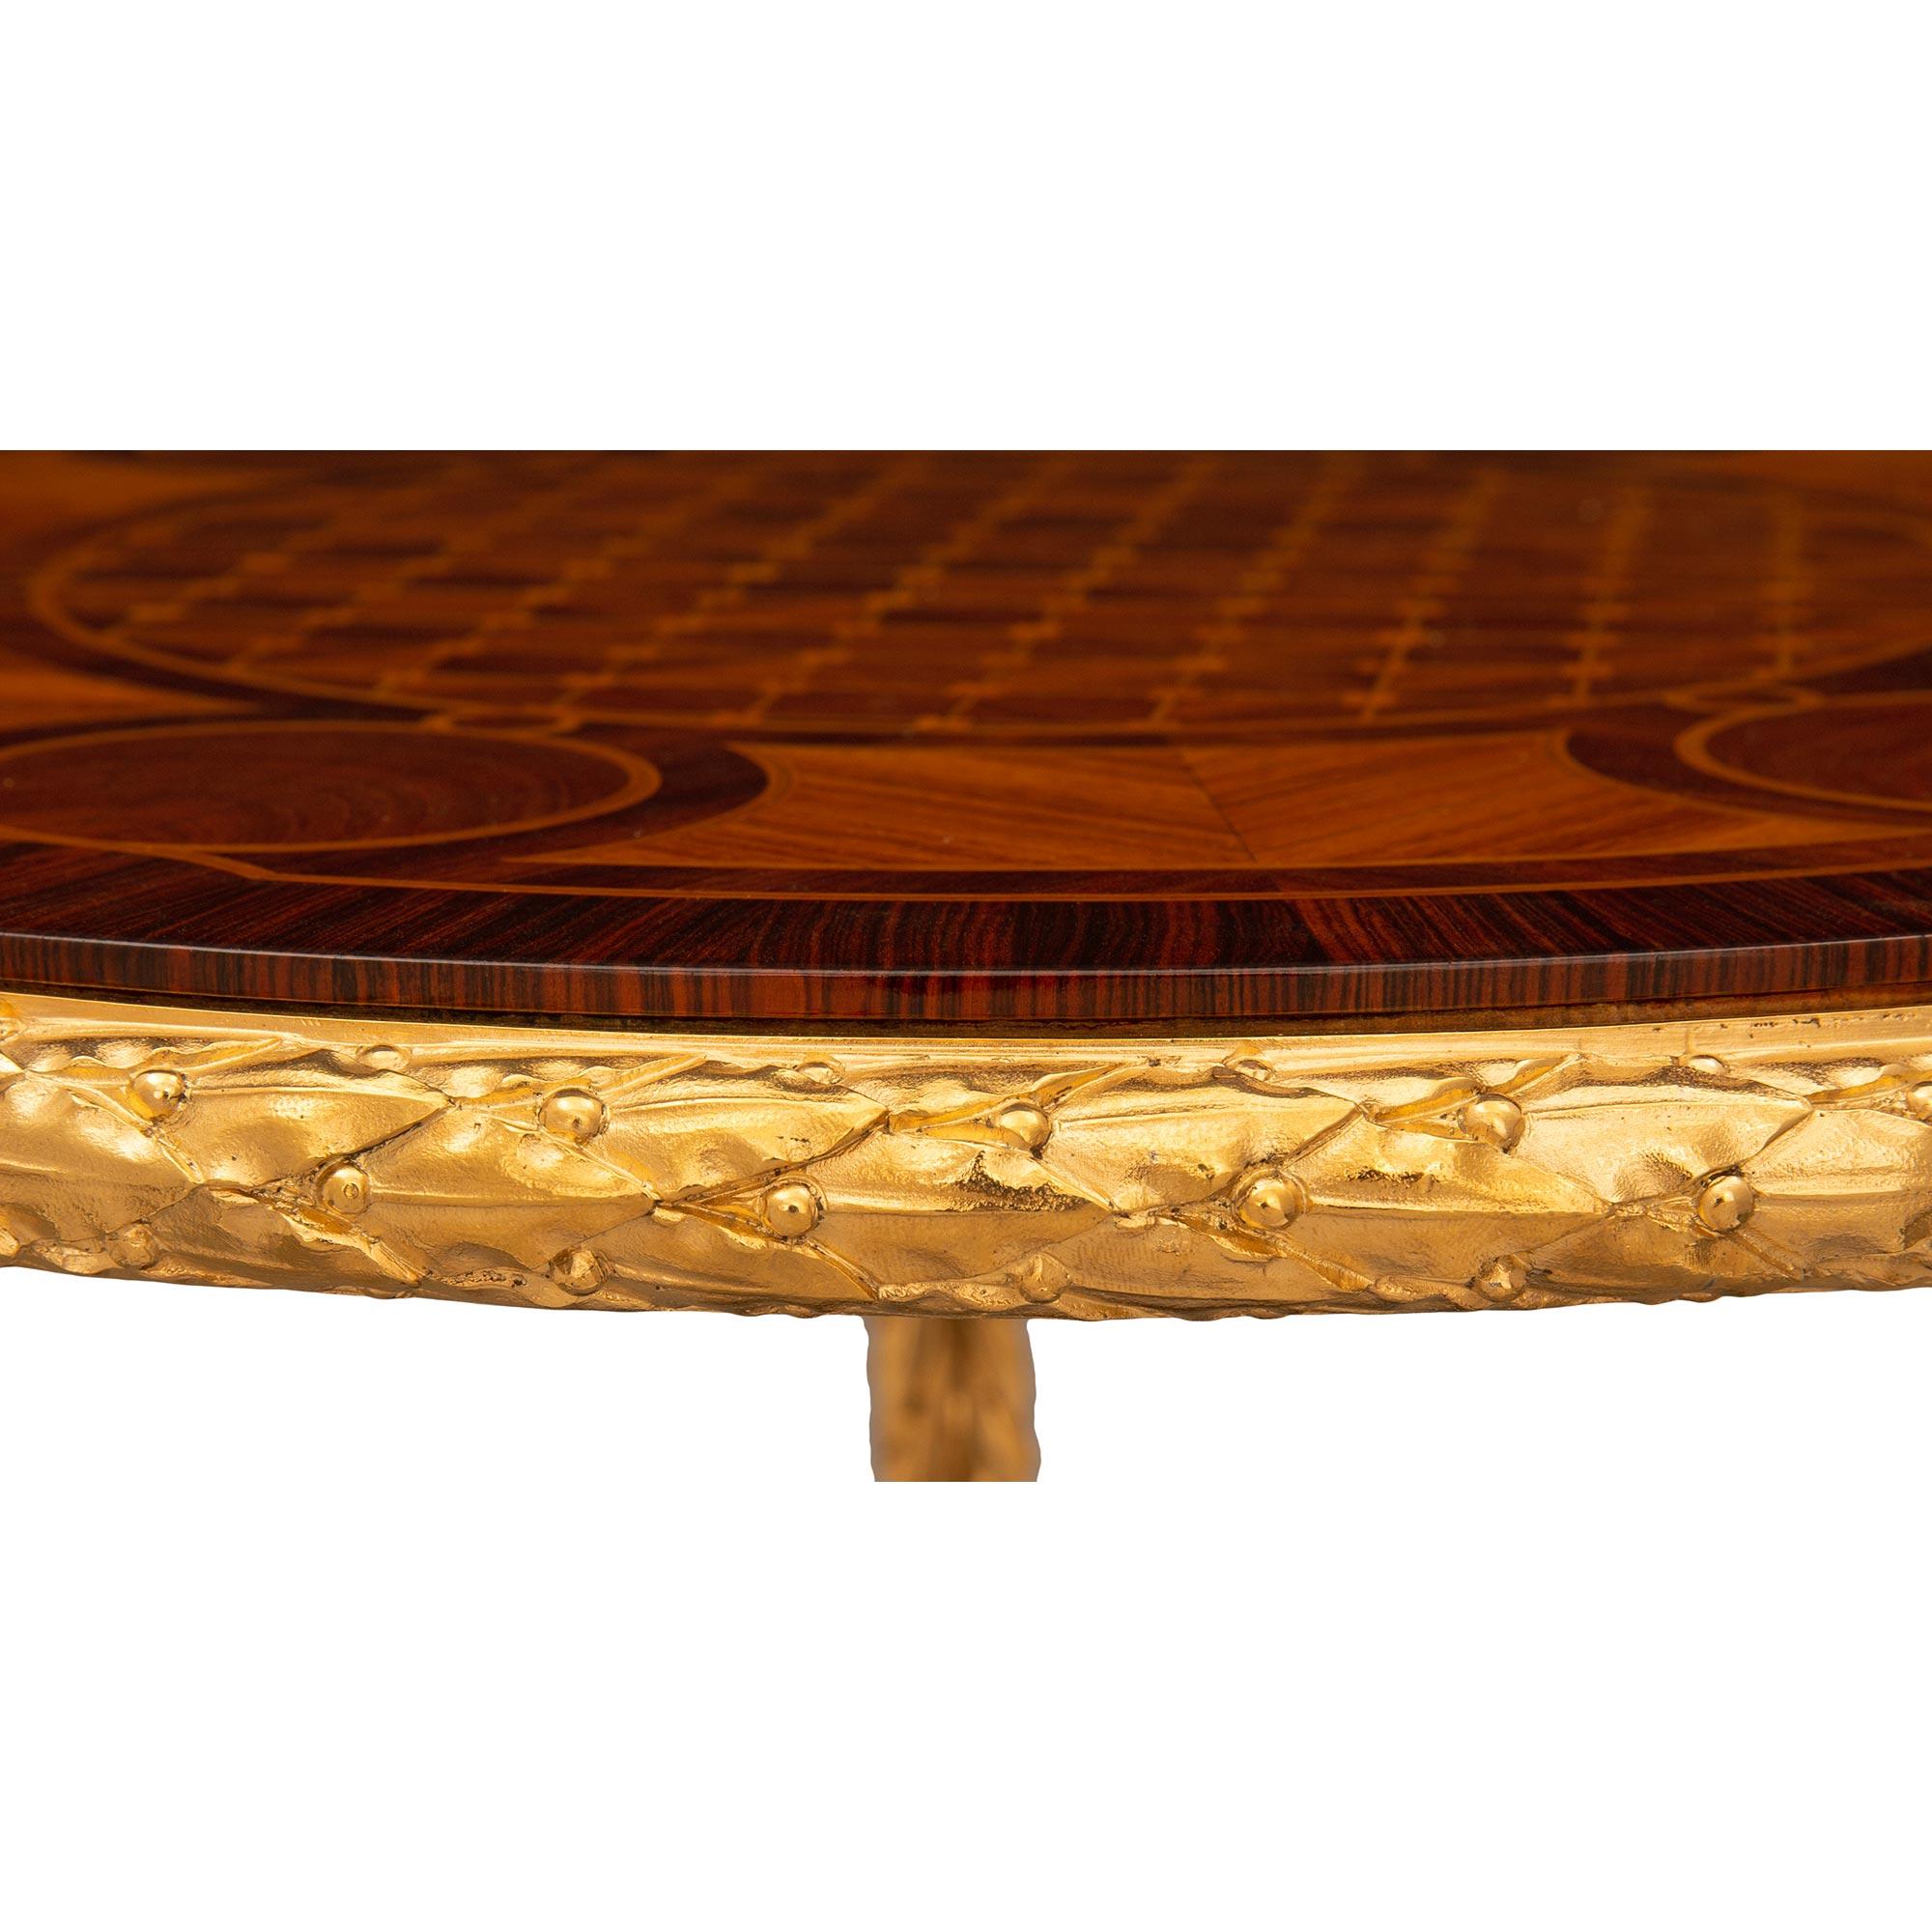 French 19th Century Belle Époque Period Kingwood, Tulipwood, Ormolu Side Table For Sale 2